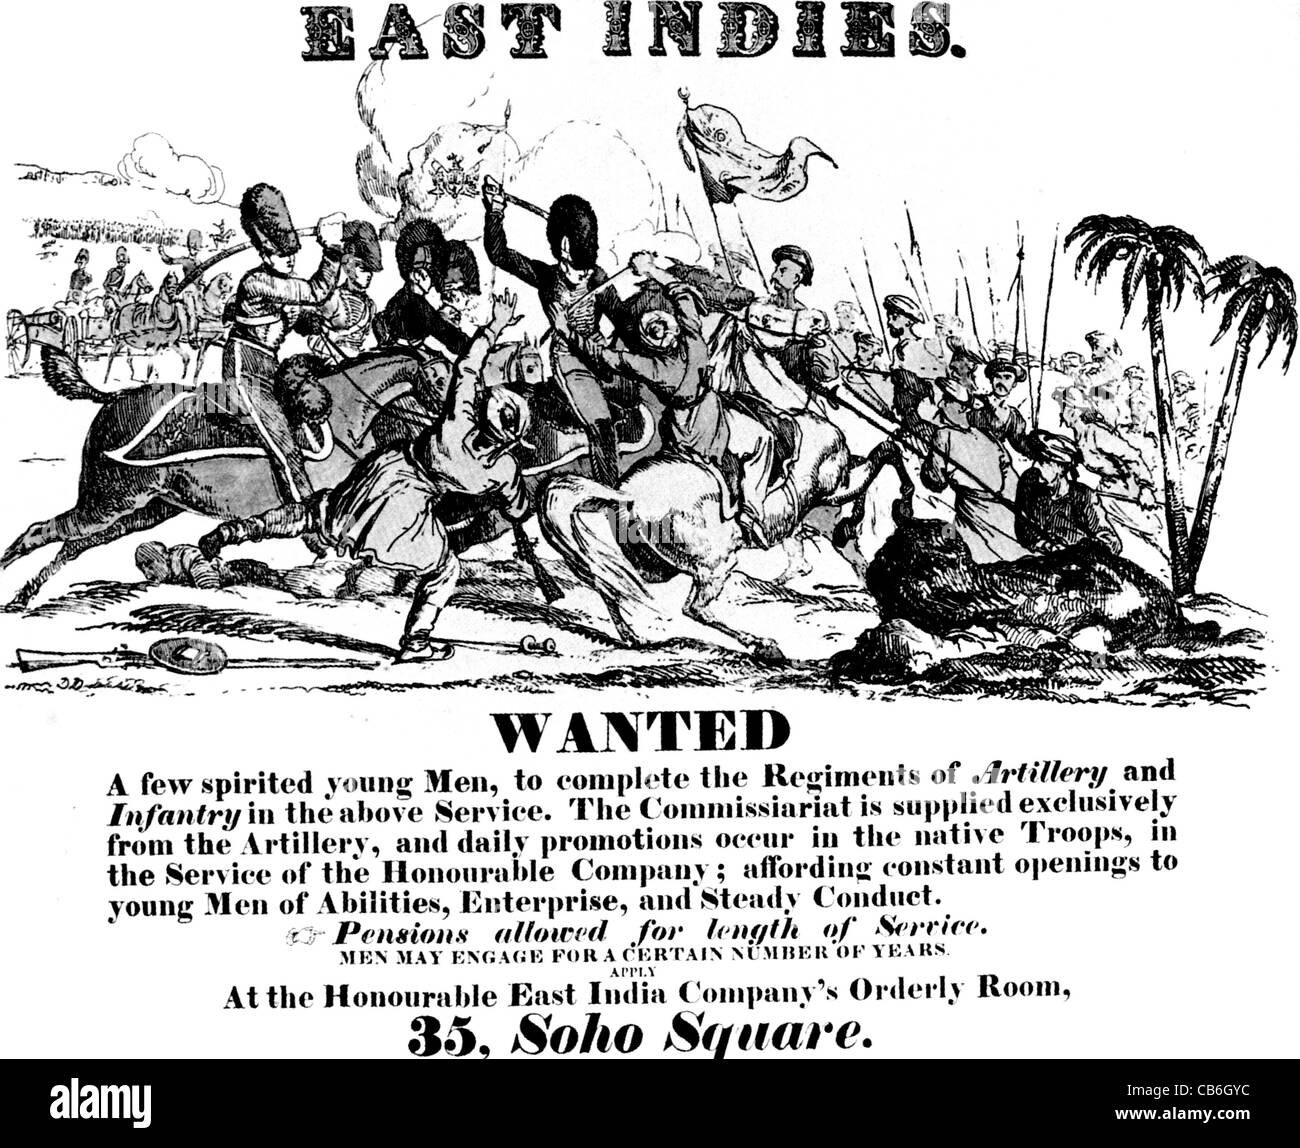 HONORABLE EAST INDIA COMPANY recruiting poster about 1810 Stock Photo